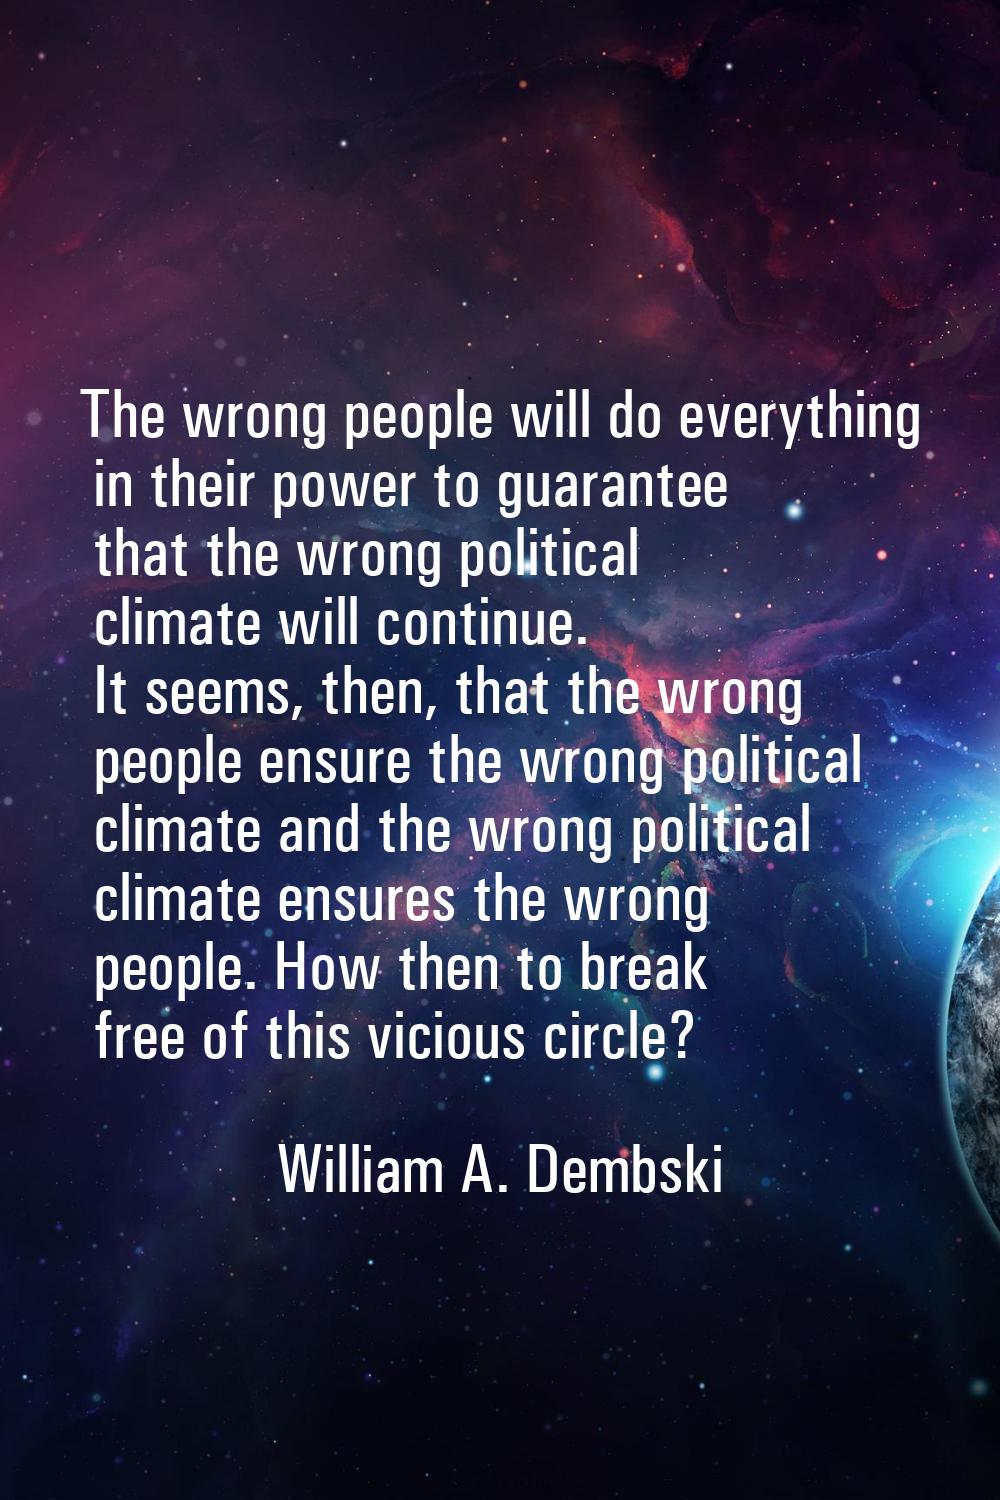 The wrong people will do everything in their power to guarantee that the wrong political climate wi